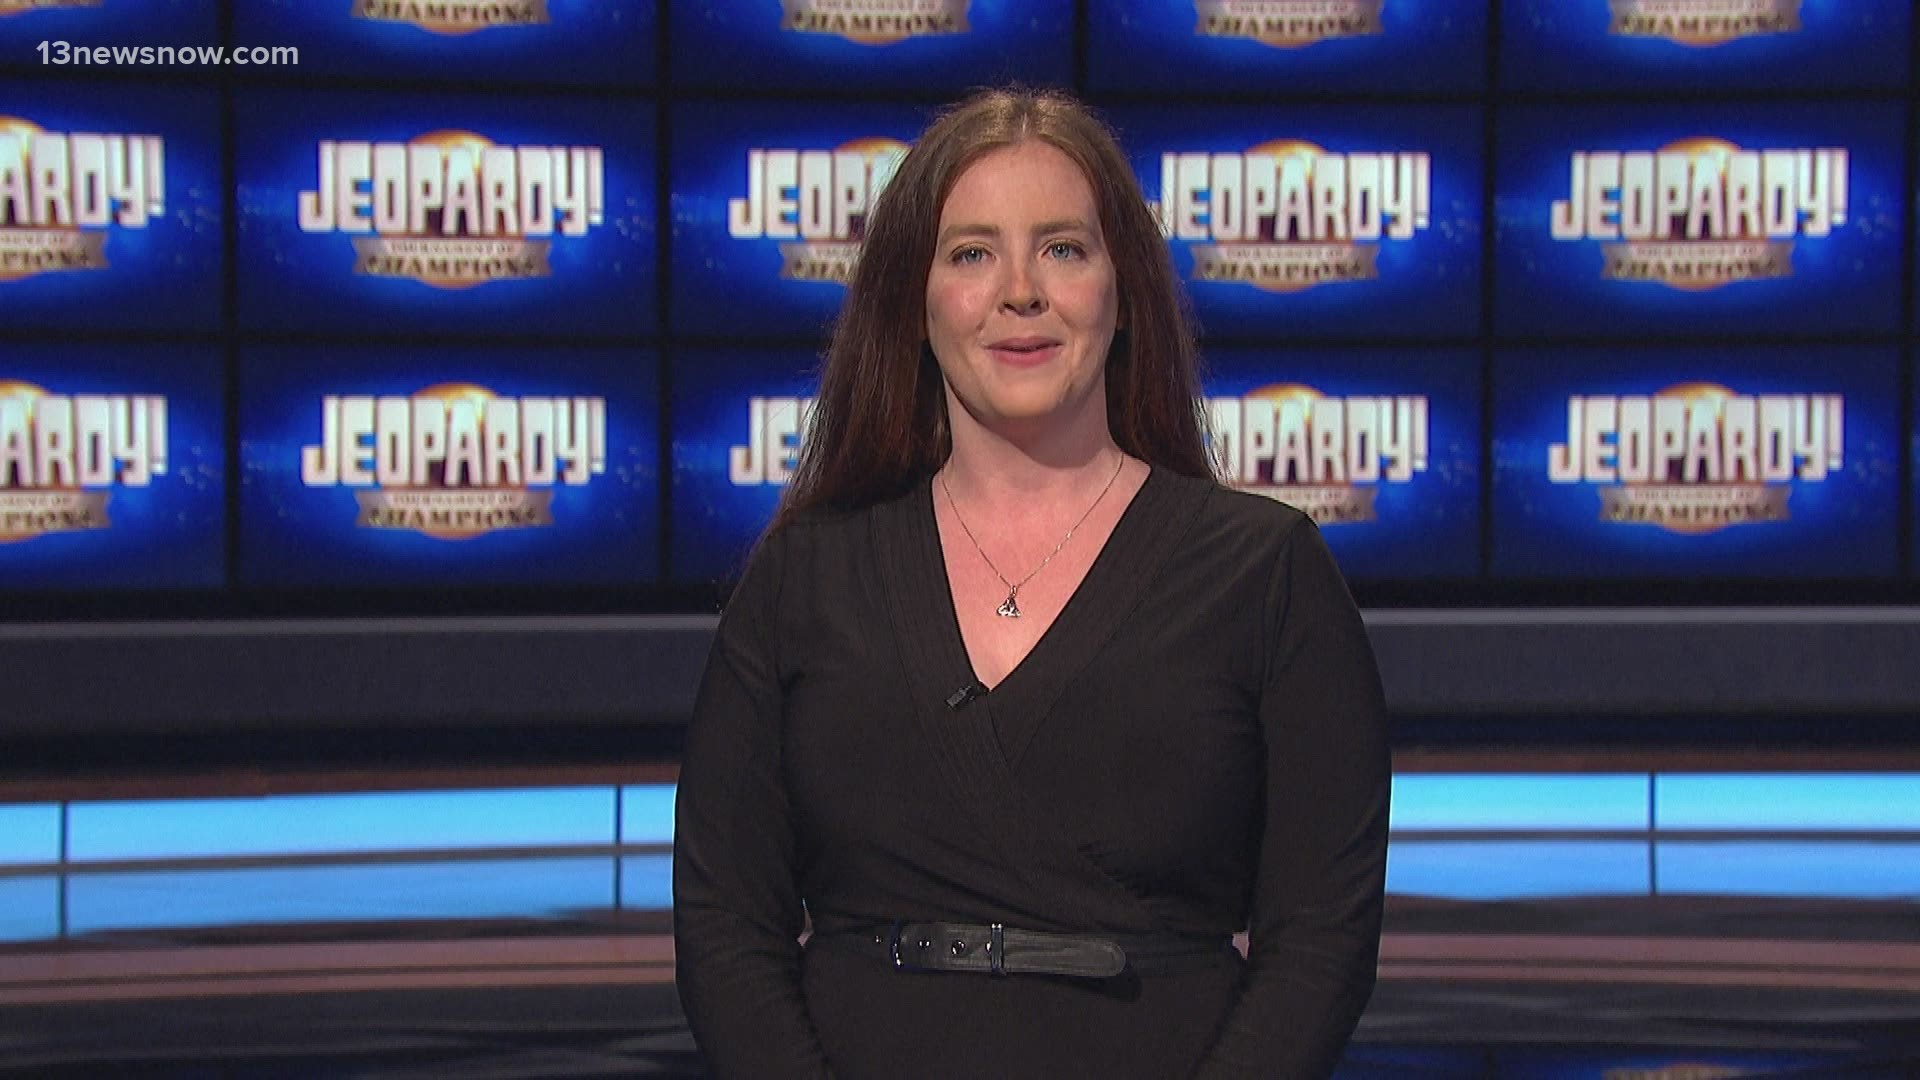 Chesapeake resident Karen Farrell is set to compete in the tournament Tuesday, May 18 at 7:30 p.m. on 13News Now!